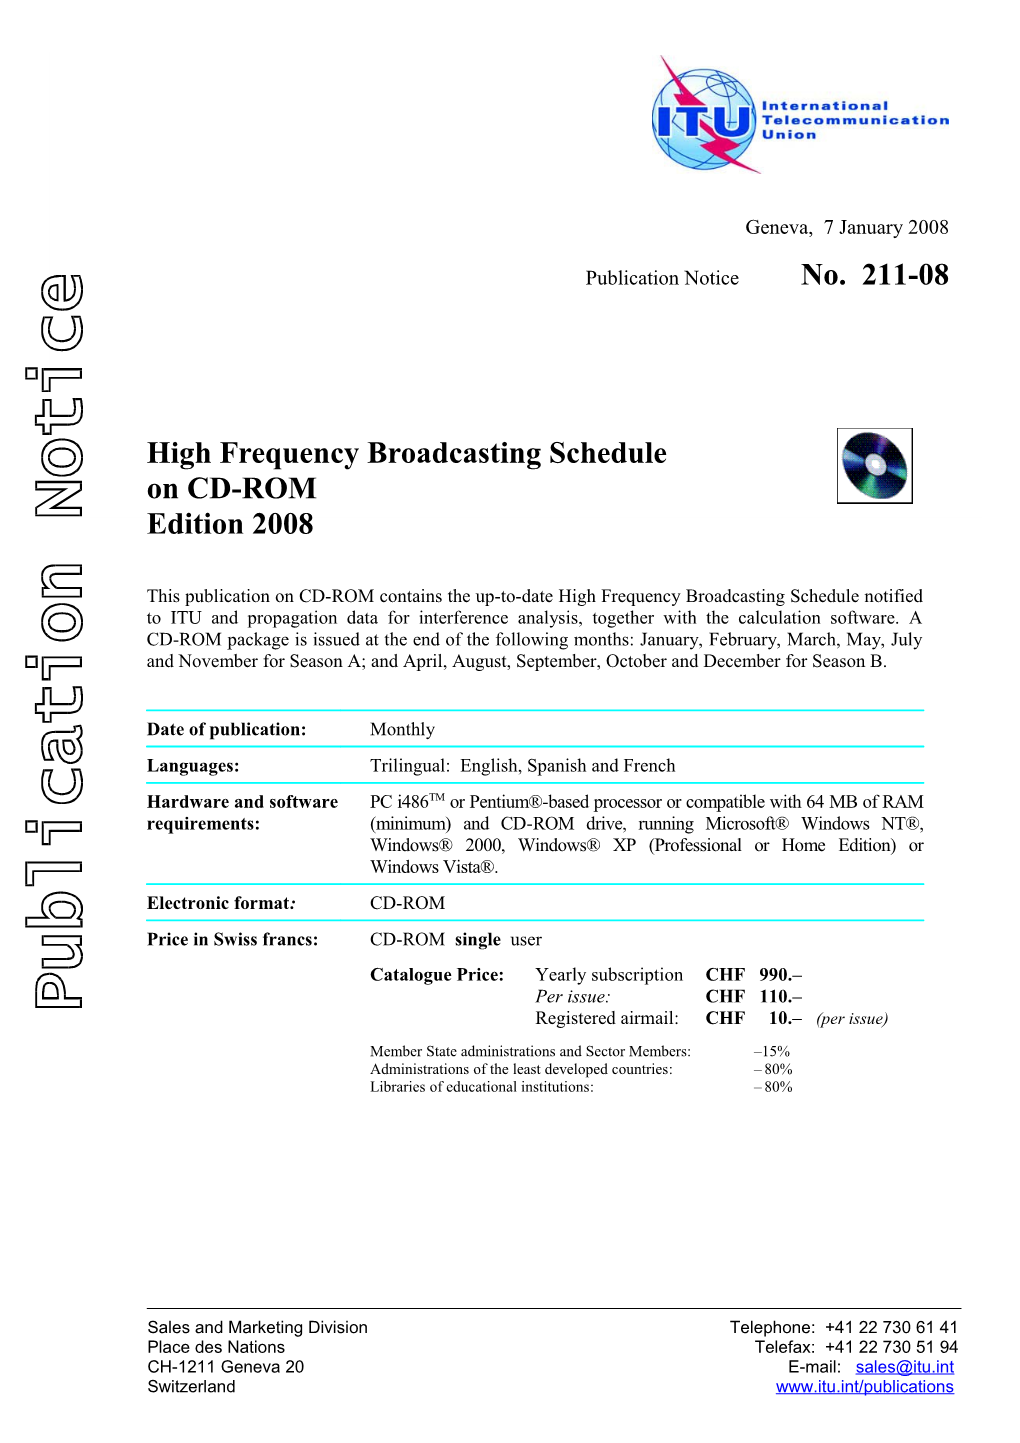 Publication Notice No. 211-08 High Frequency Broadcasting Schedule on CD-ROM Edition 2008